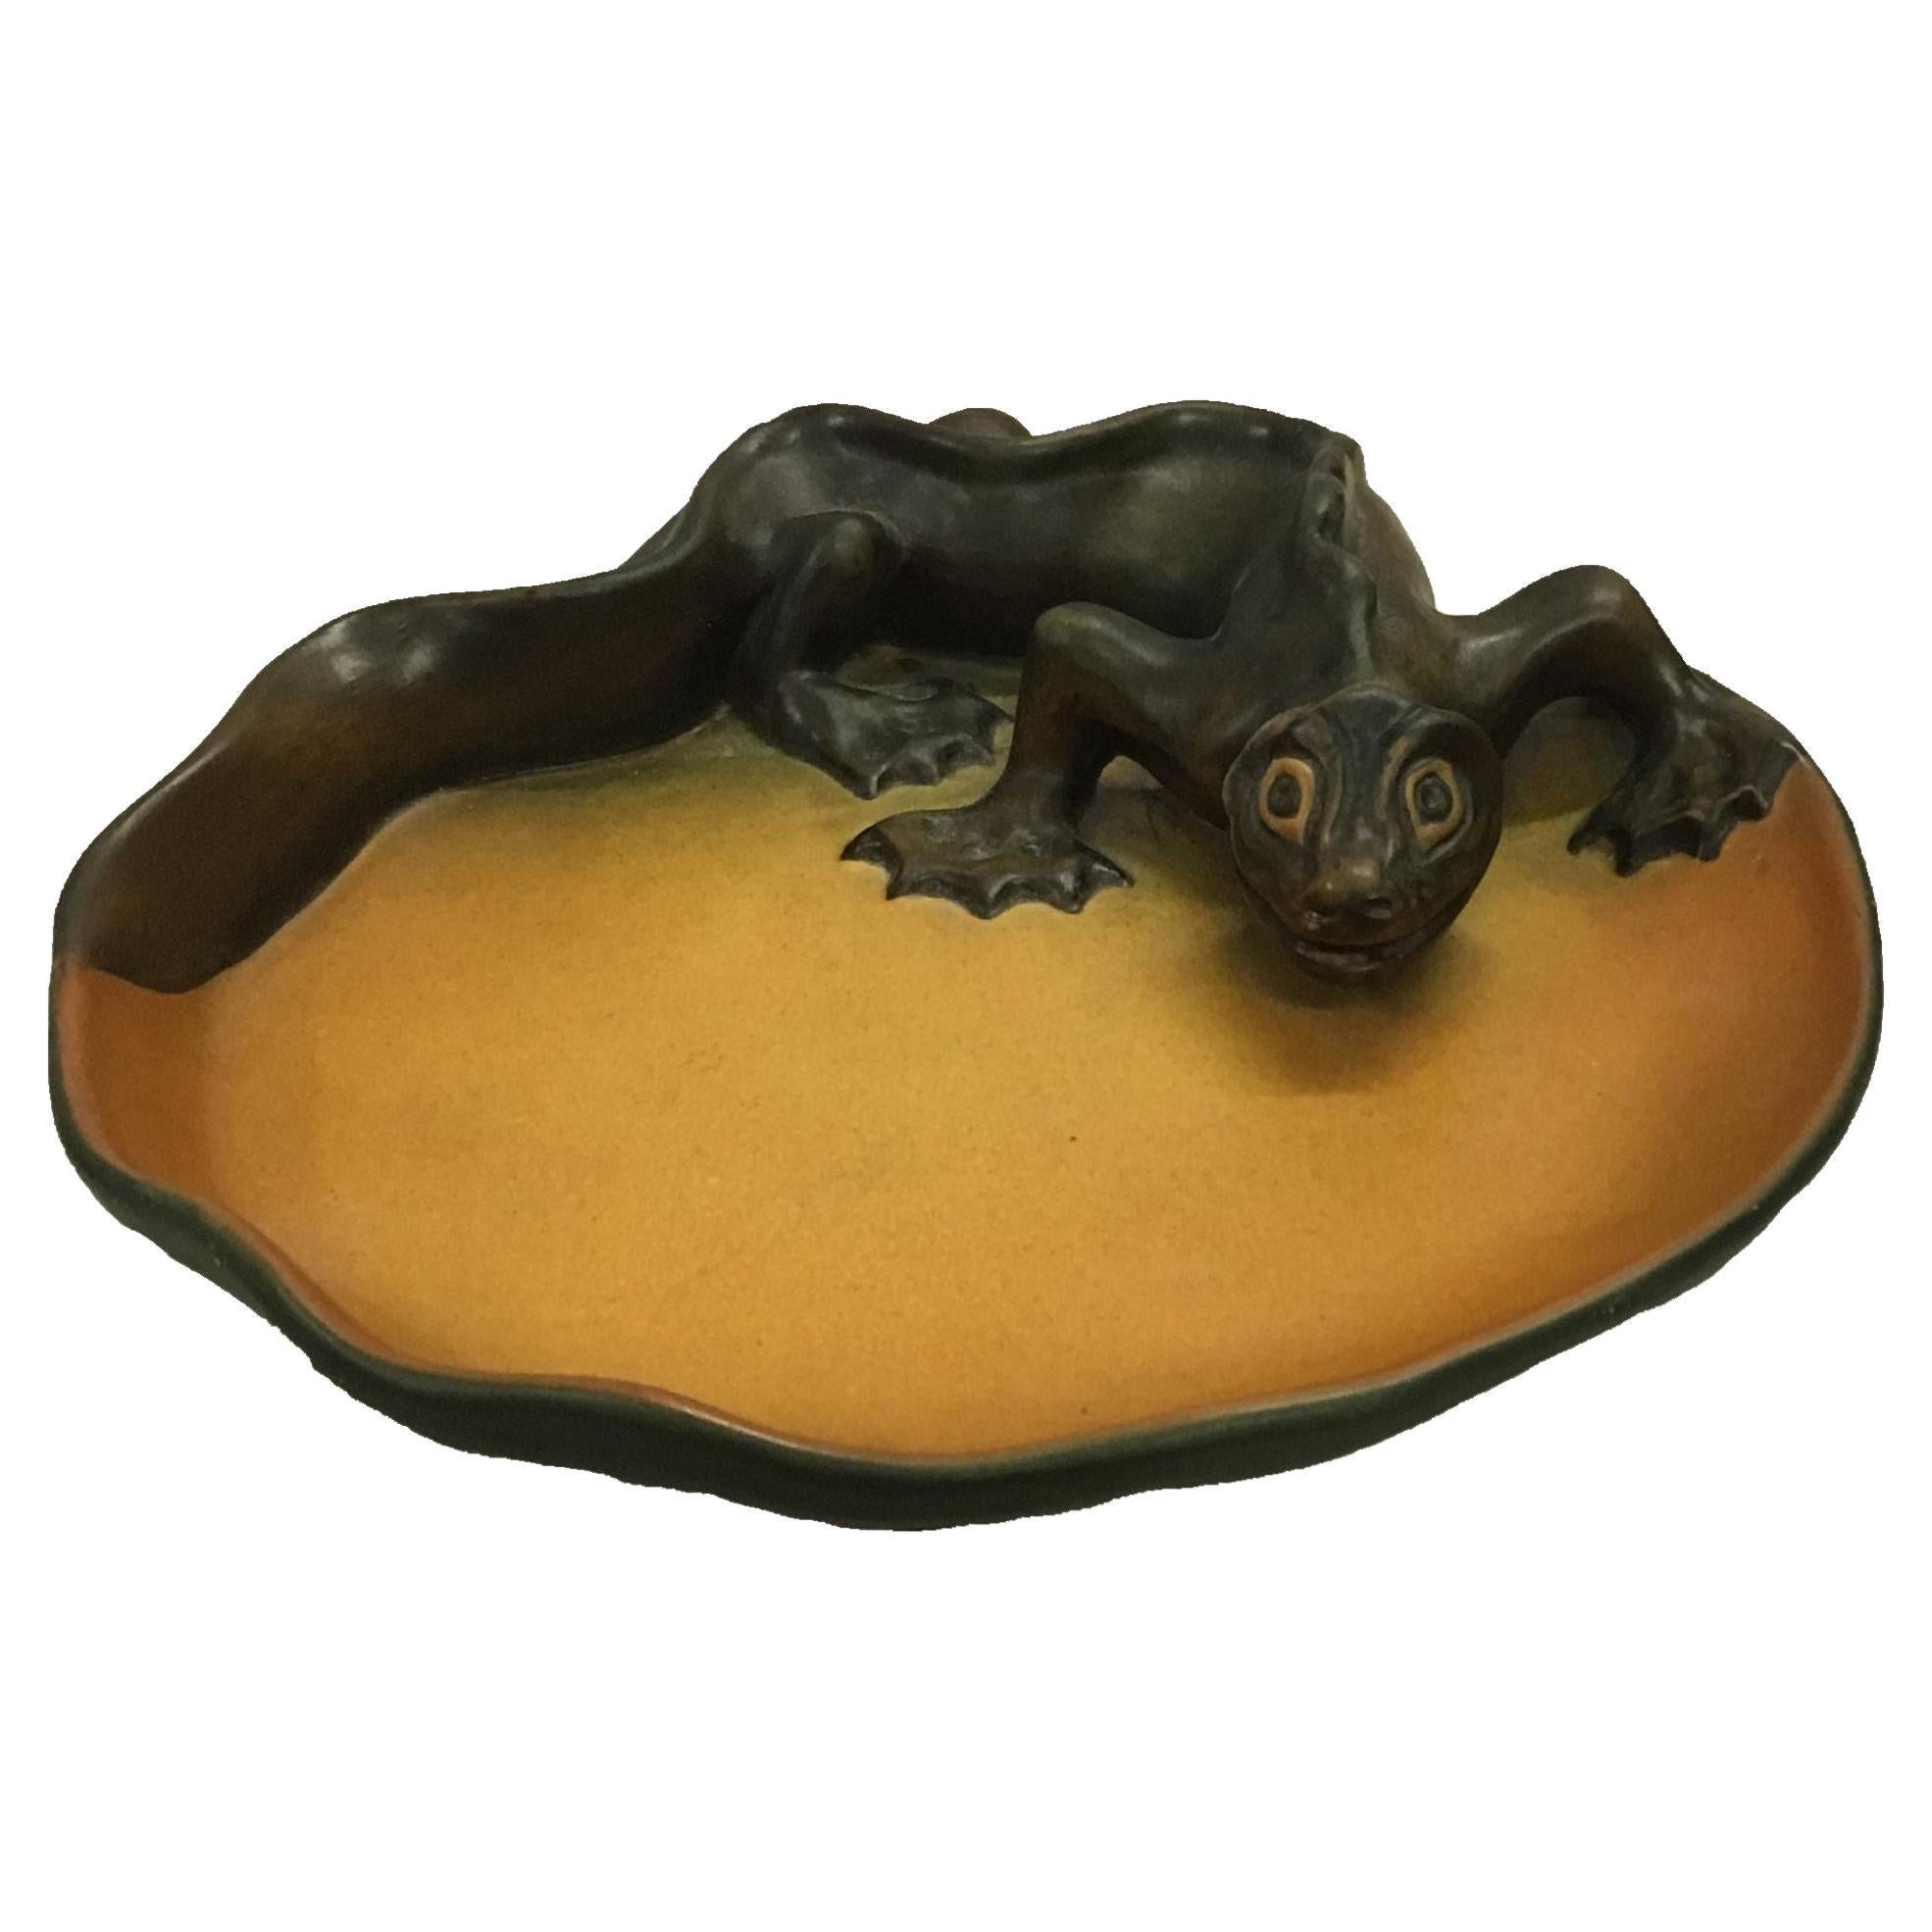 1900's Hand-Crafted Danish Art Nouveau Lizard Ash Tray / Bowl by P. Ibsens Enke For Sale